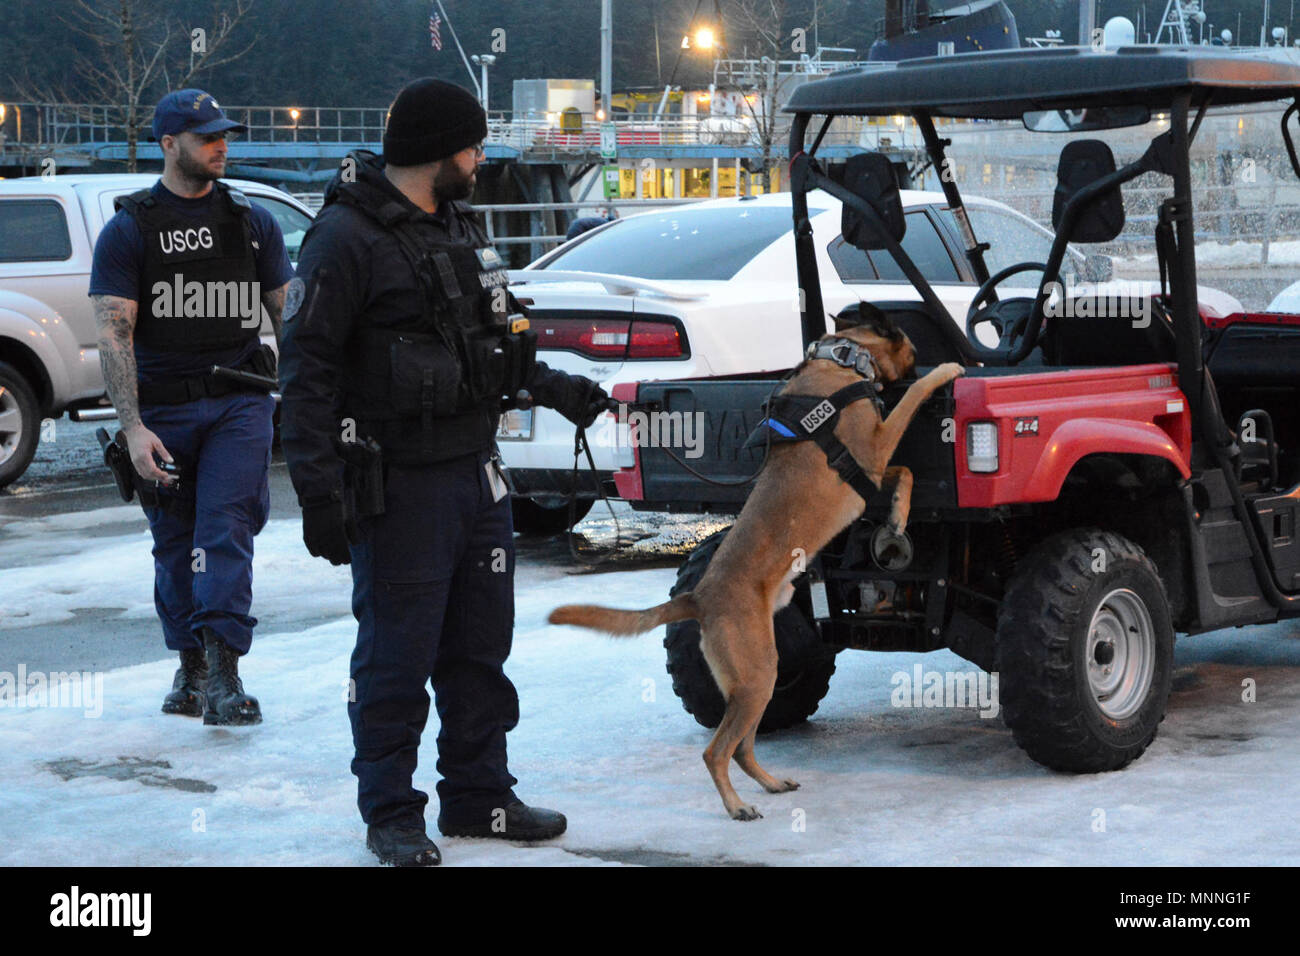 Canine Ricky and his handler Petty Officer 1st Class Jordan Brosowsky, a member of Coast Guard Maritime Safety and Security Team San Francisco (91105), conducts a sweep of the Alaska Marine Highway System ferry terminal parking lot in Juneau, Alaska, March 12, 2018. The Coast Guard, Alaska State Troopers and Juneau Police Department partnered together during the law enforcement operation to detect and deter illegal activity on Alaska's waterways. Stock Photo